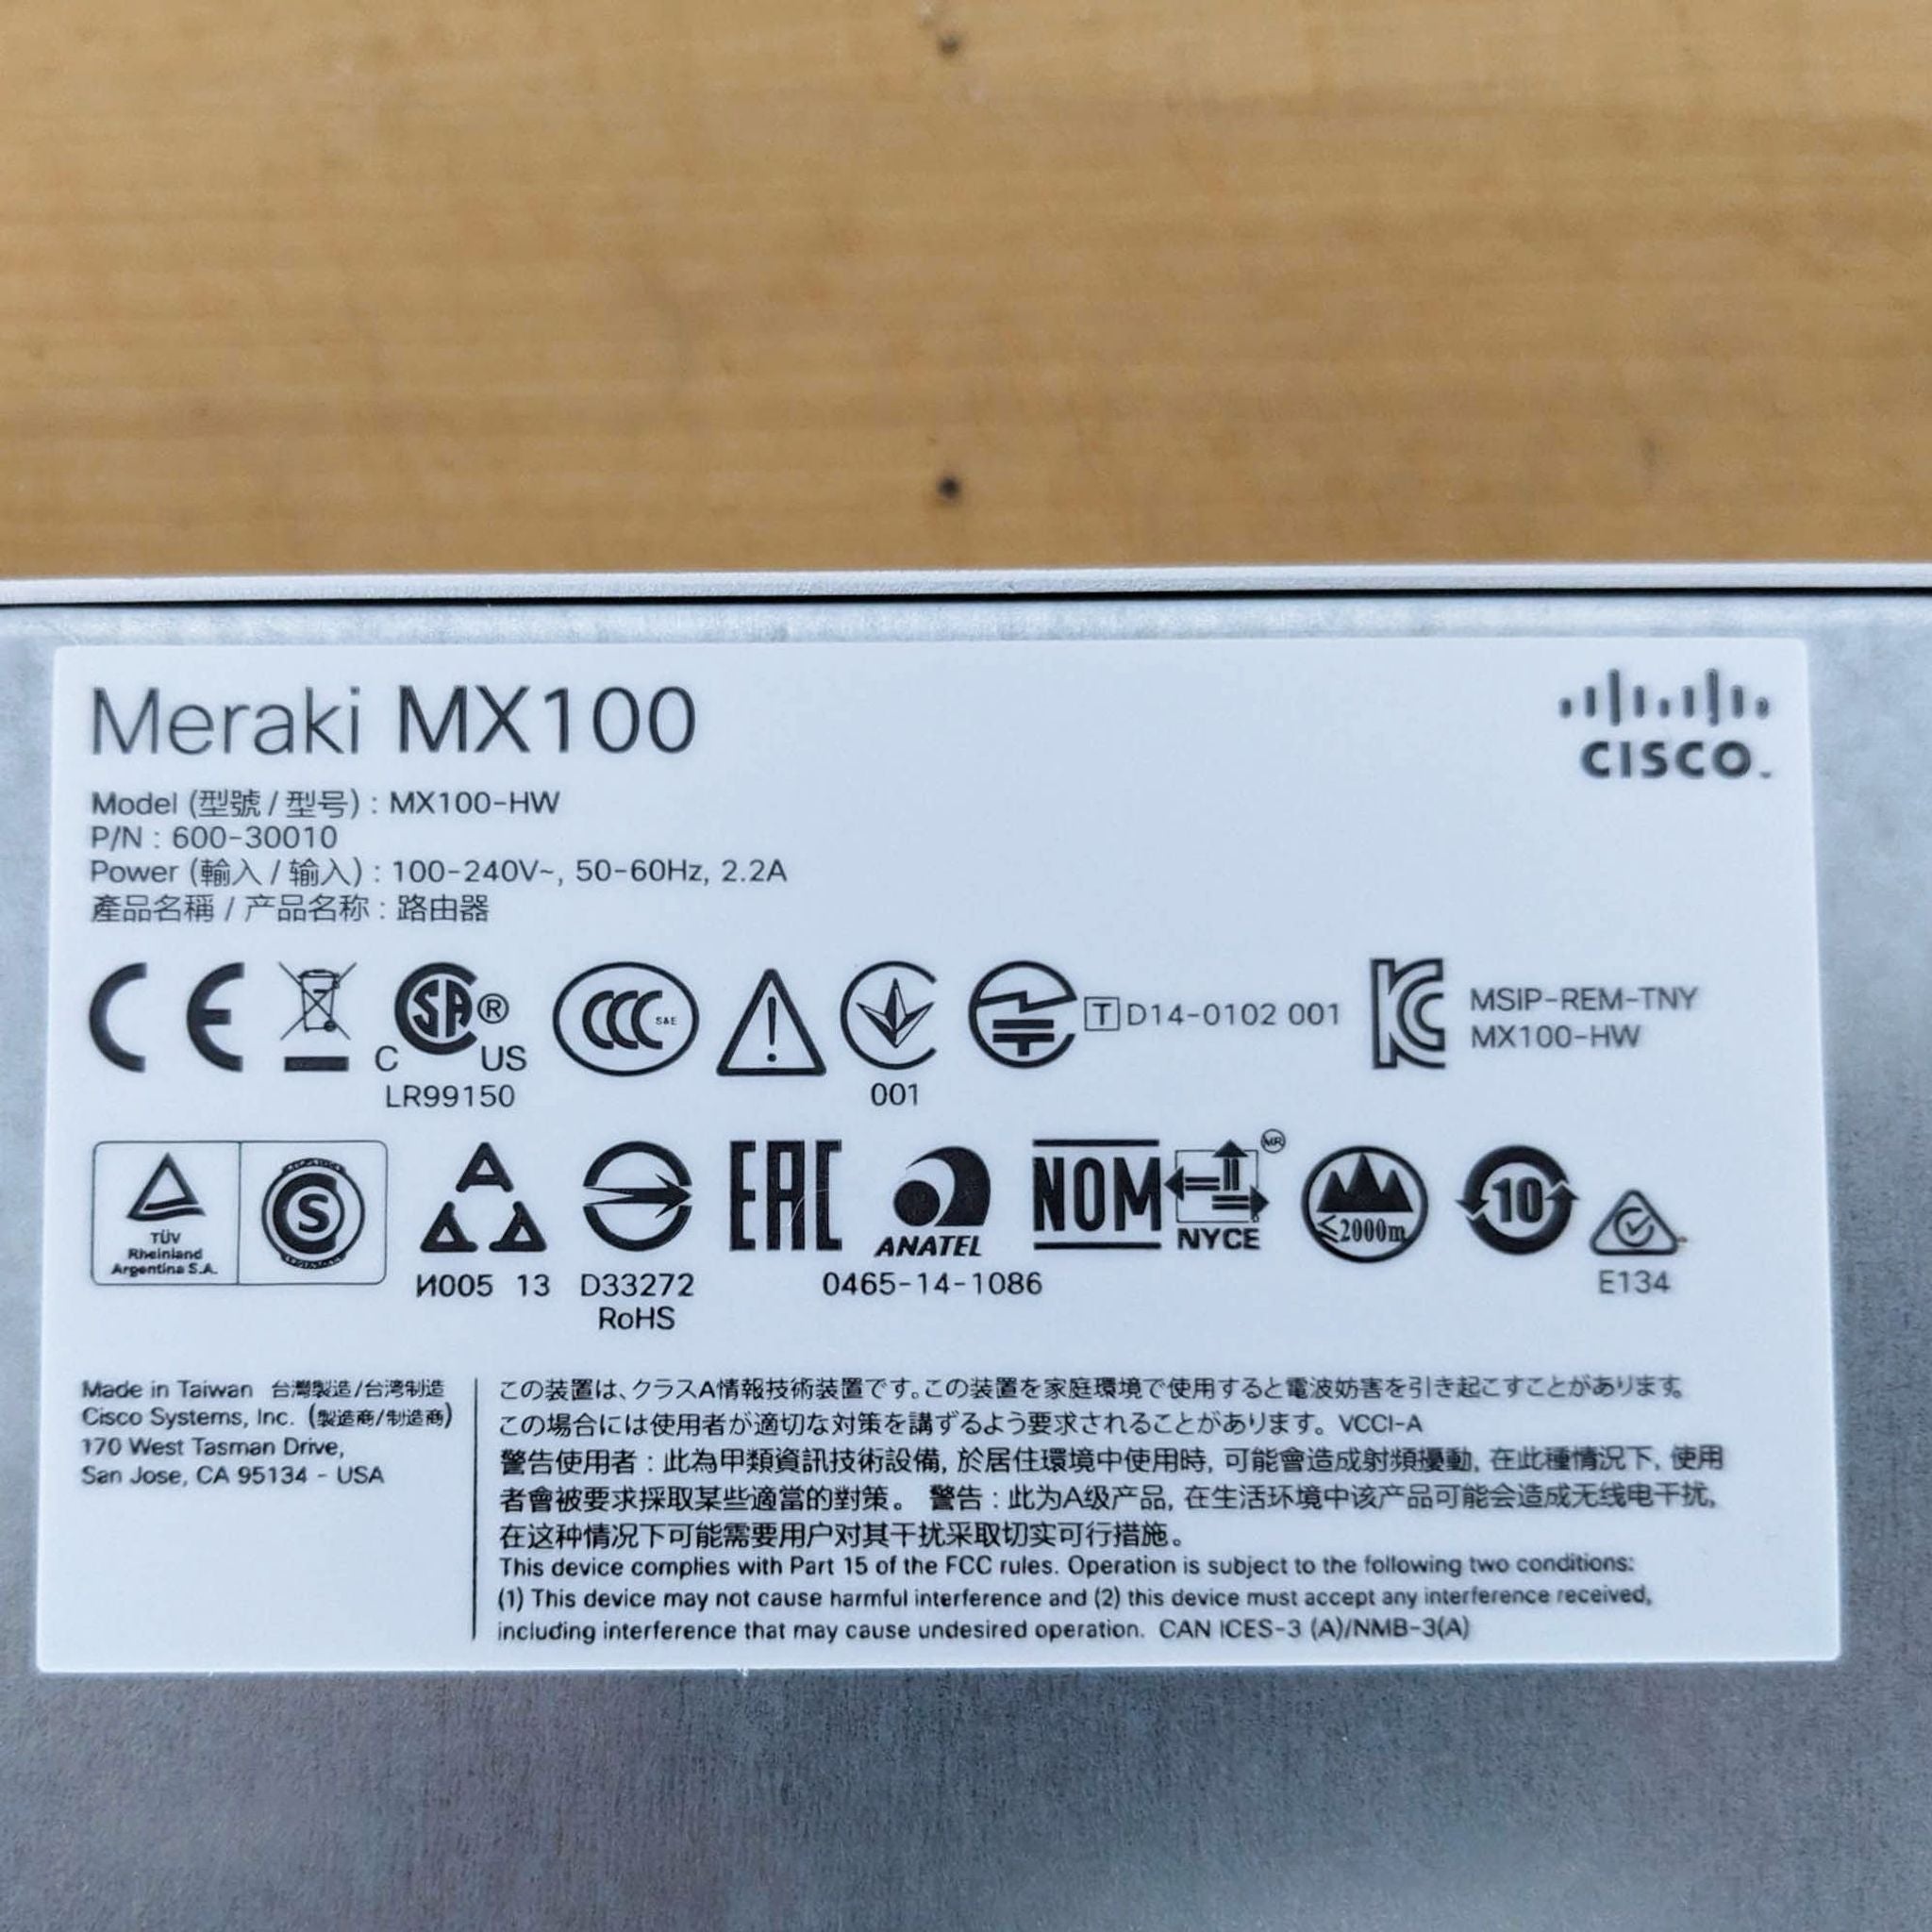 Label sticker of a Cisco Meraki MX100 networking device detailing model information, certifications, and regulatory compliance icons.